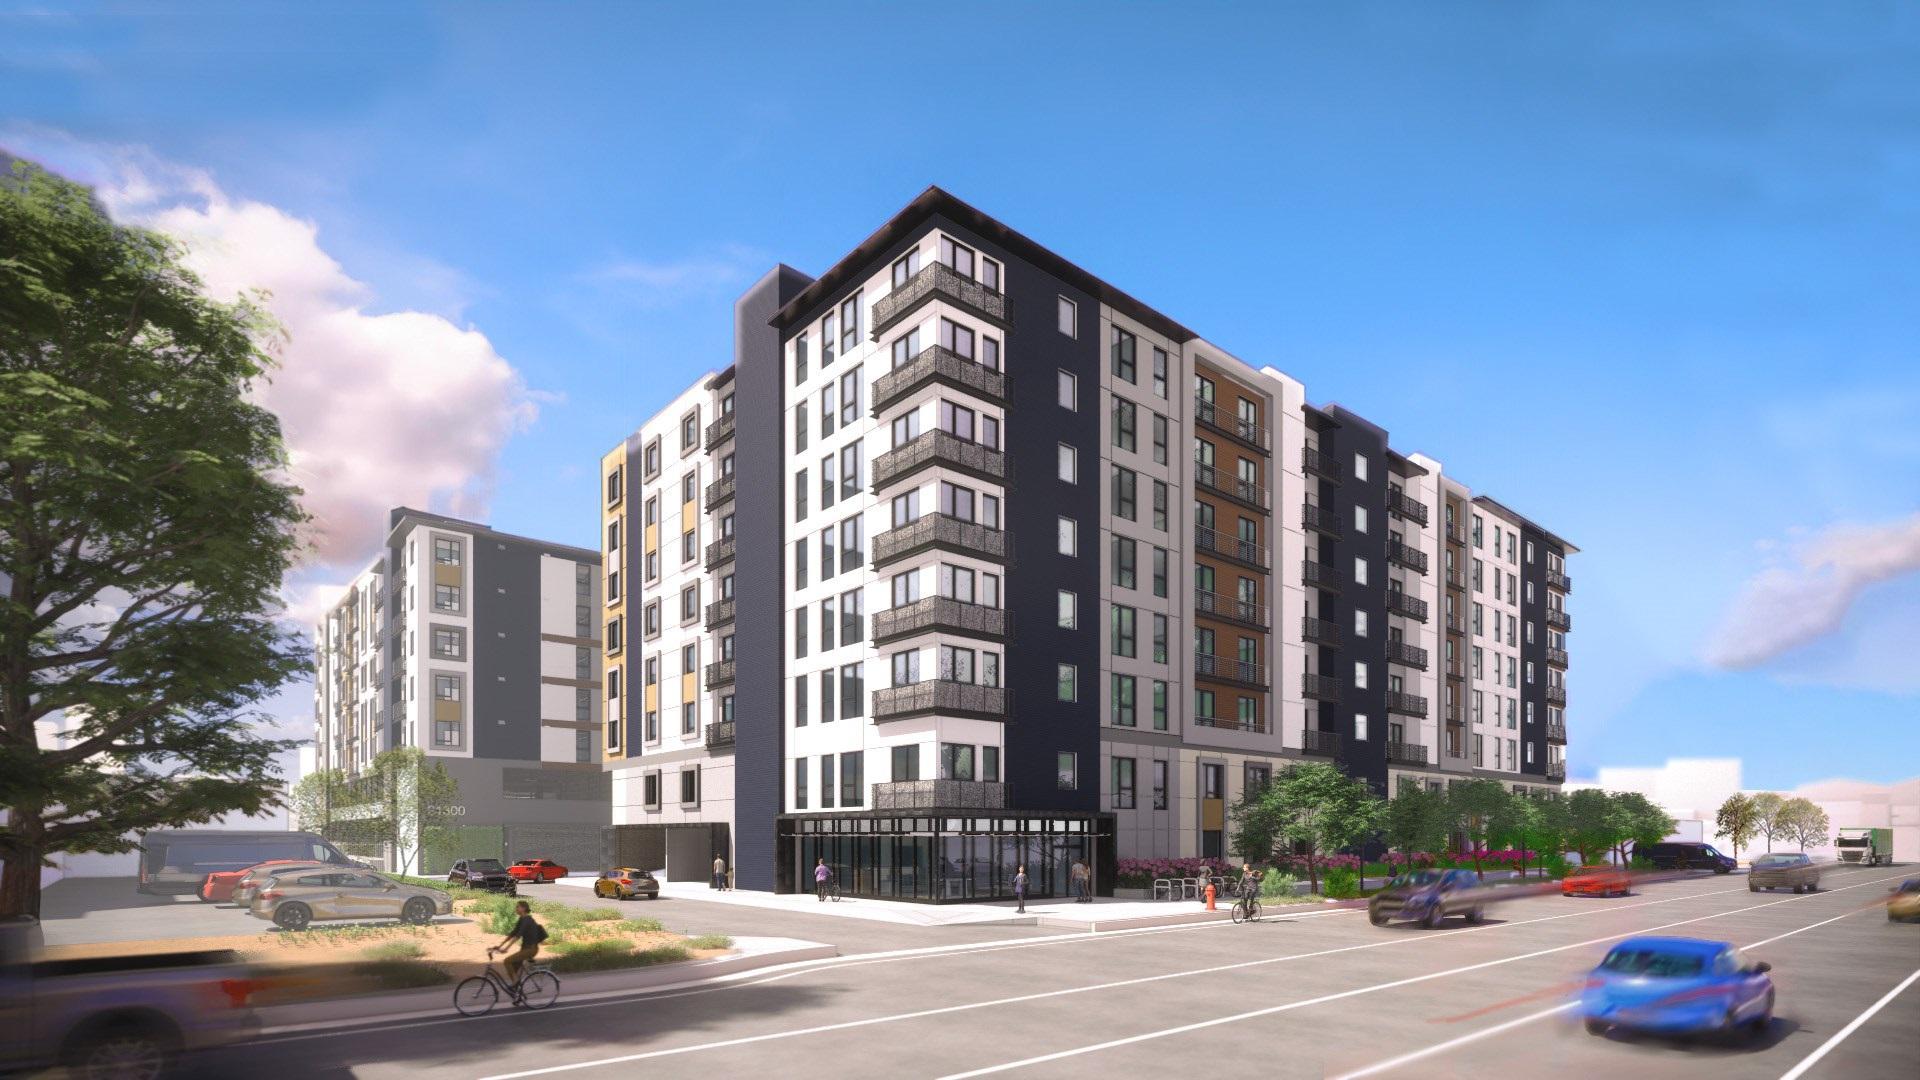 Here's the big affordable housing complex pitched for 21300 W 